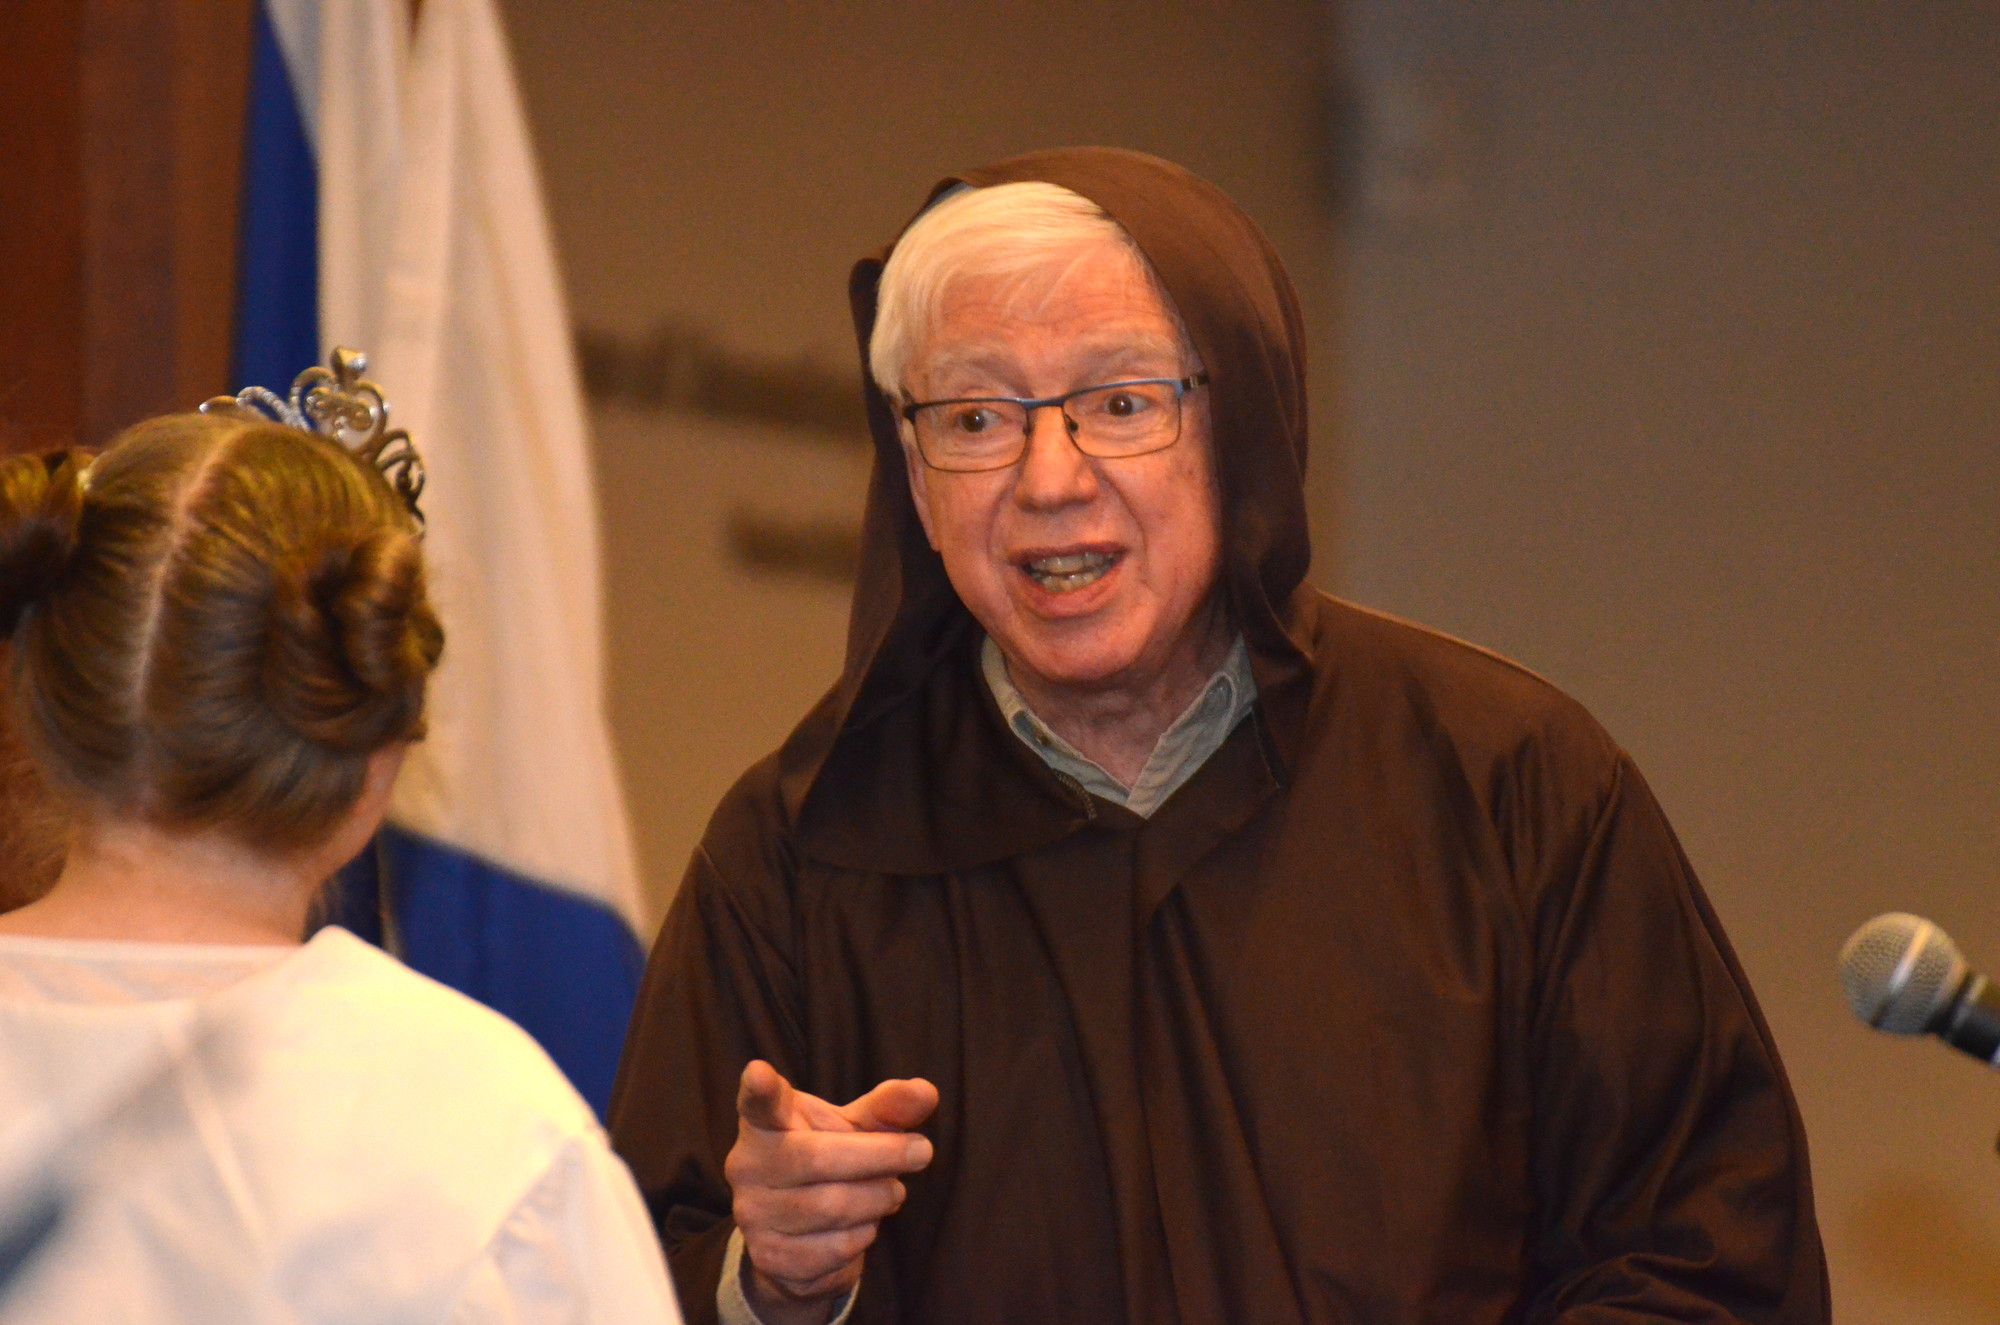 Barry Howard during the performance of the Purim story at Temple Avodah.